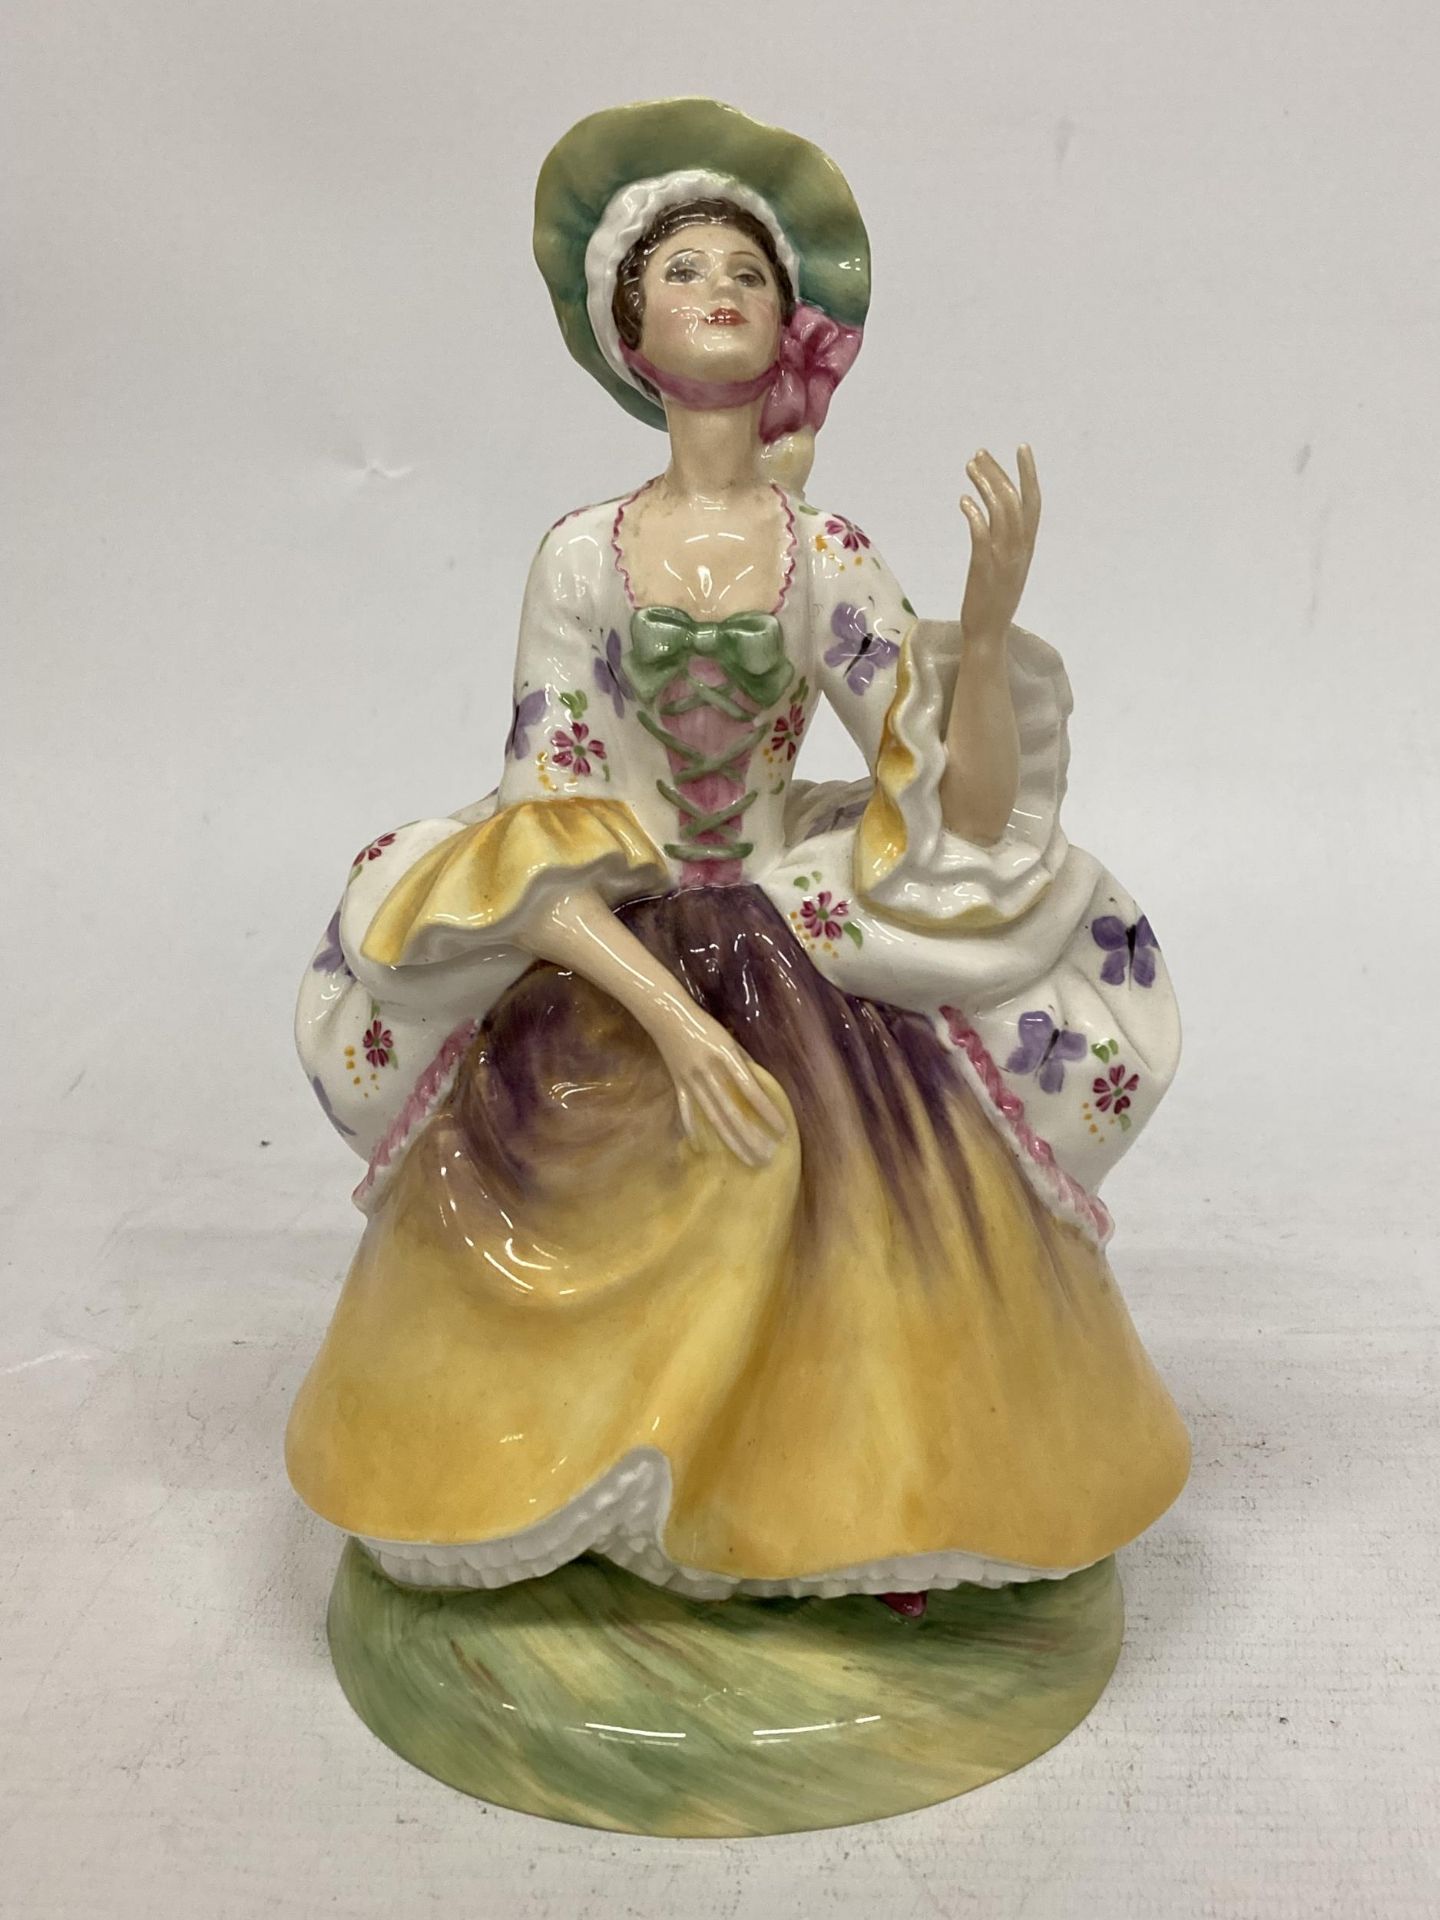 A PEGGY DAVIES FOR JANUS POTTERY BONE CHINA FIGURE - PEG WOFFINGTON ILLUSTRIOUS LADIES OF THE STAGE